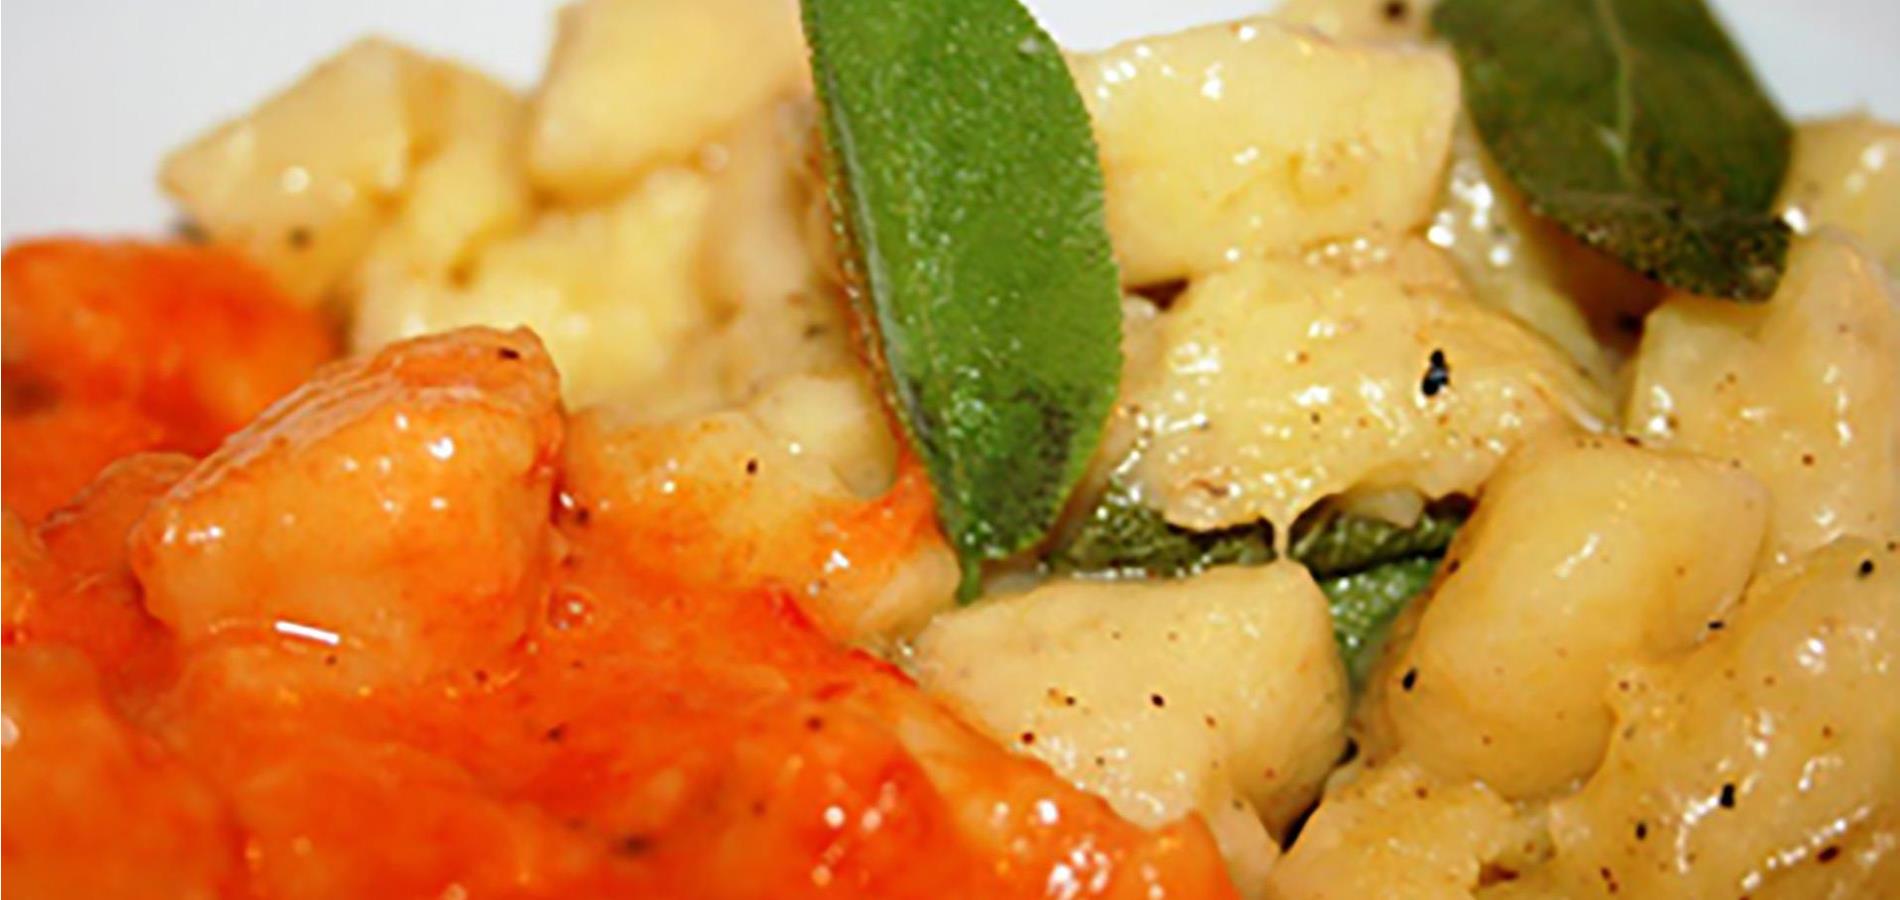 Gnocchi with sage butter or tomato sauce